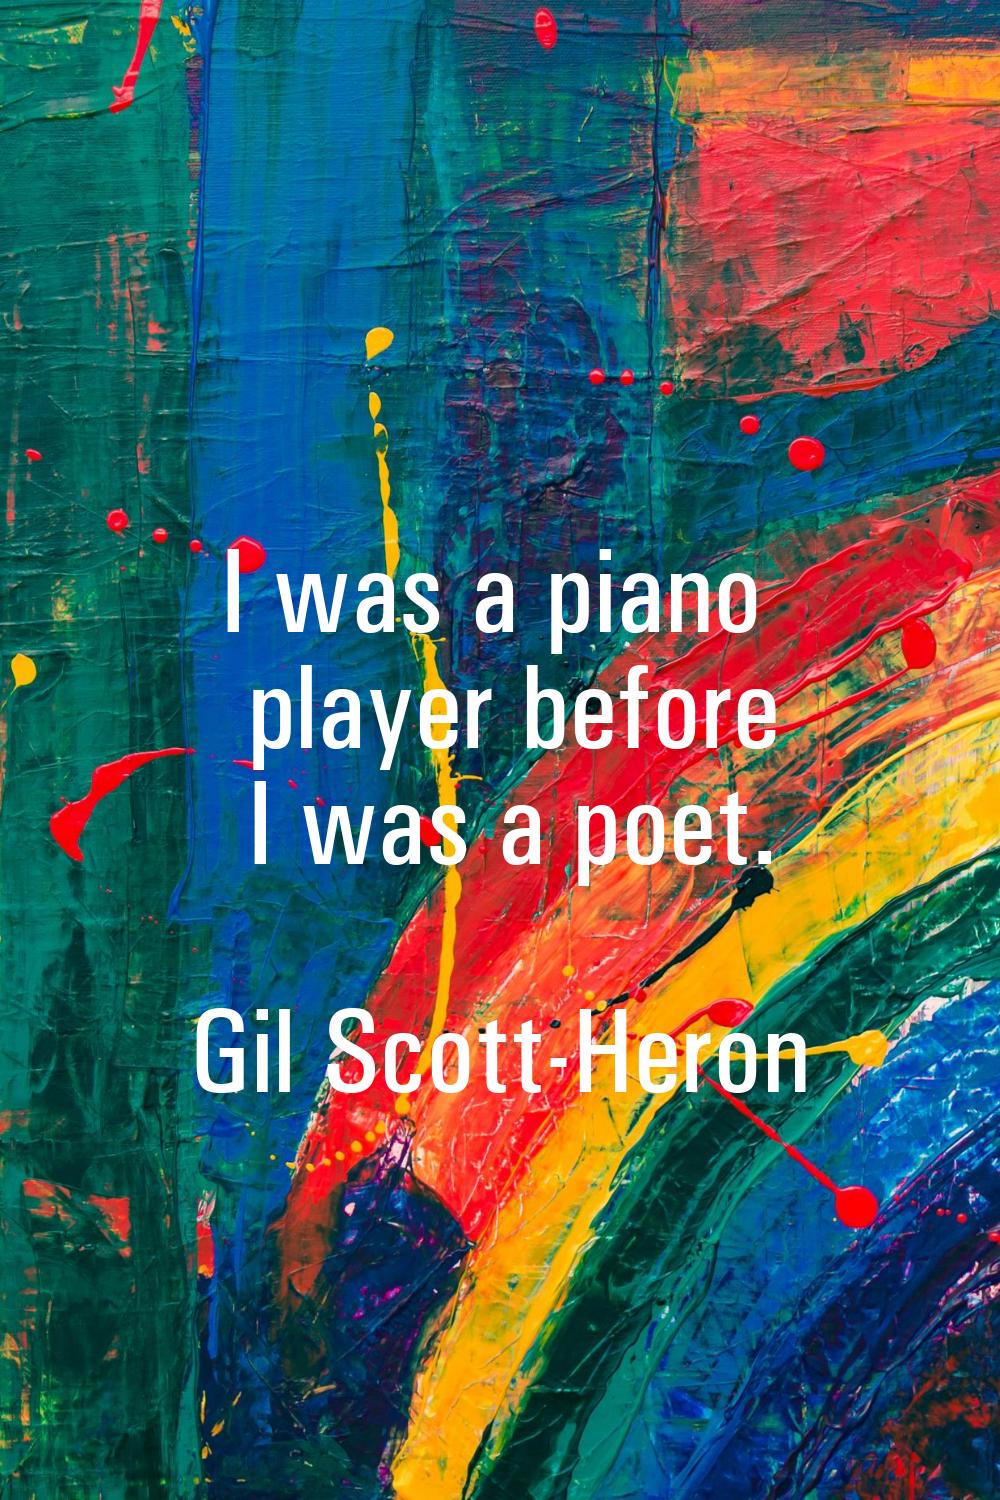 I was a piano player before I was a poet.